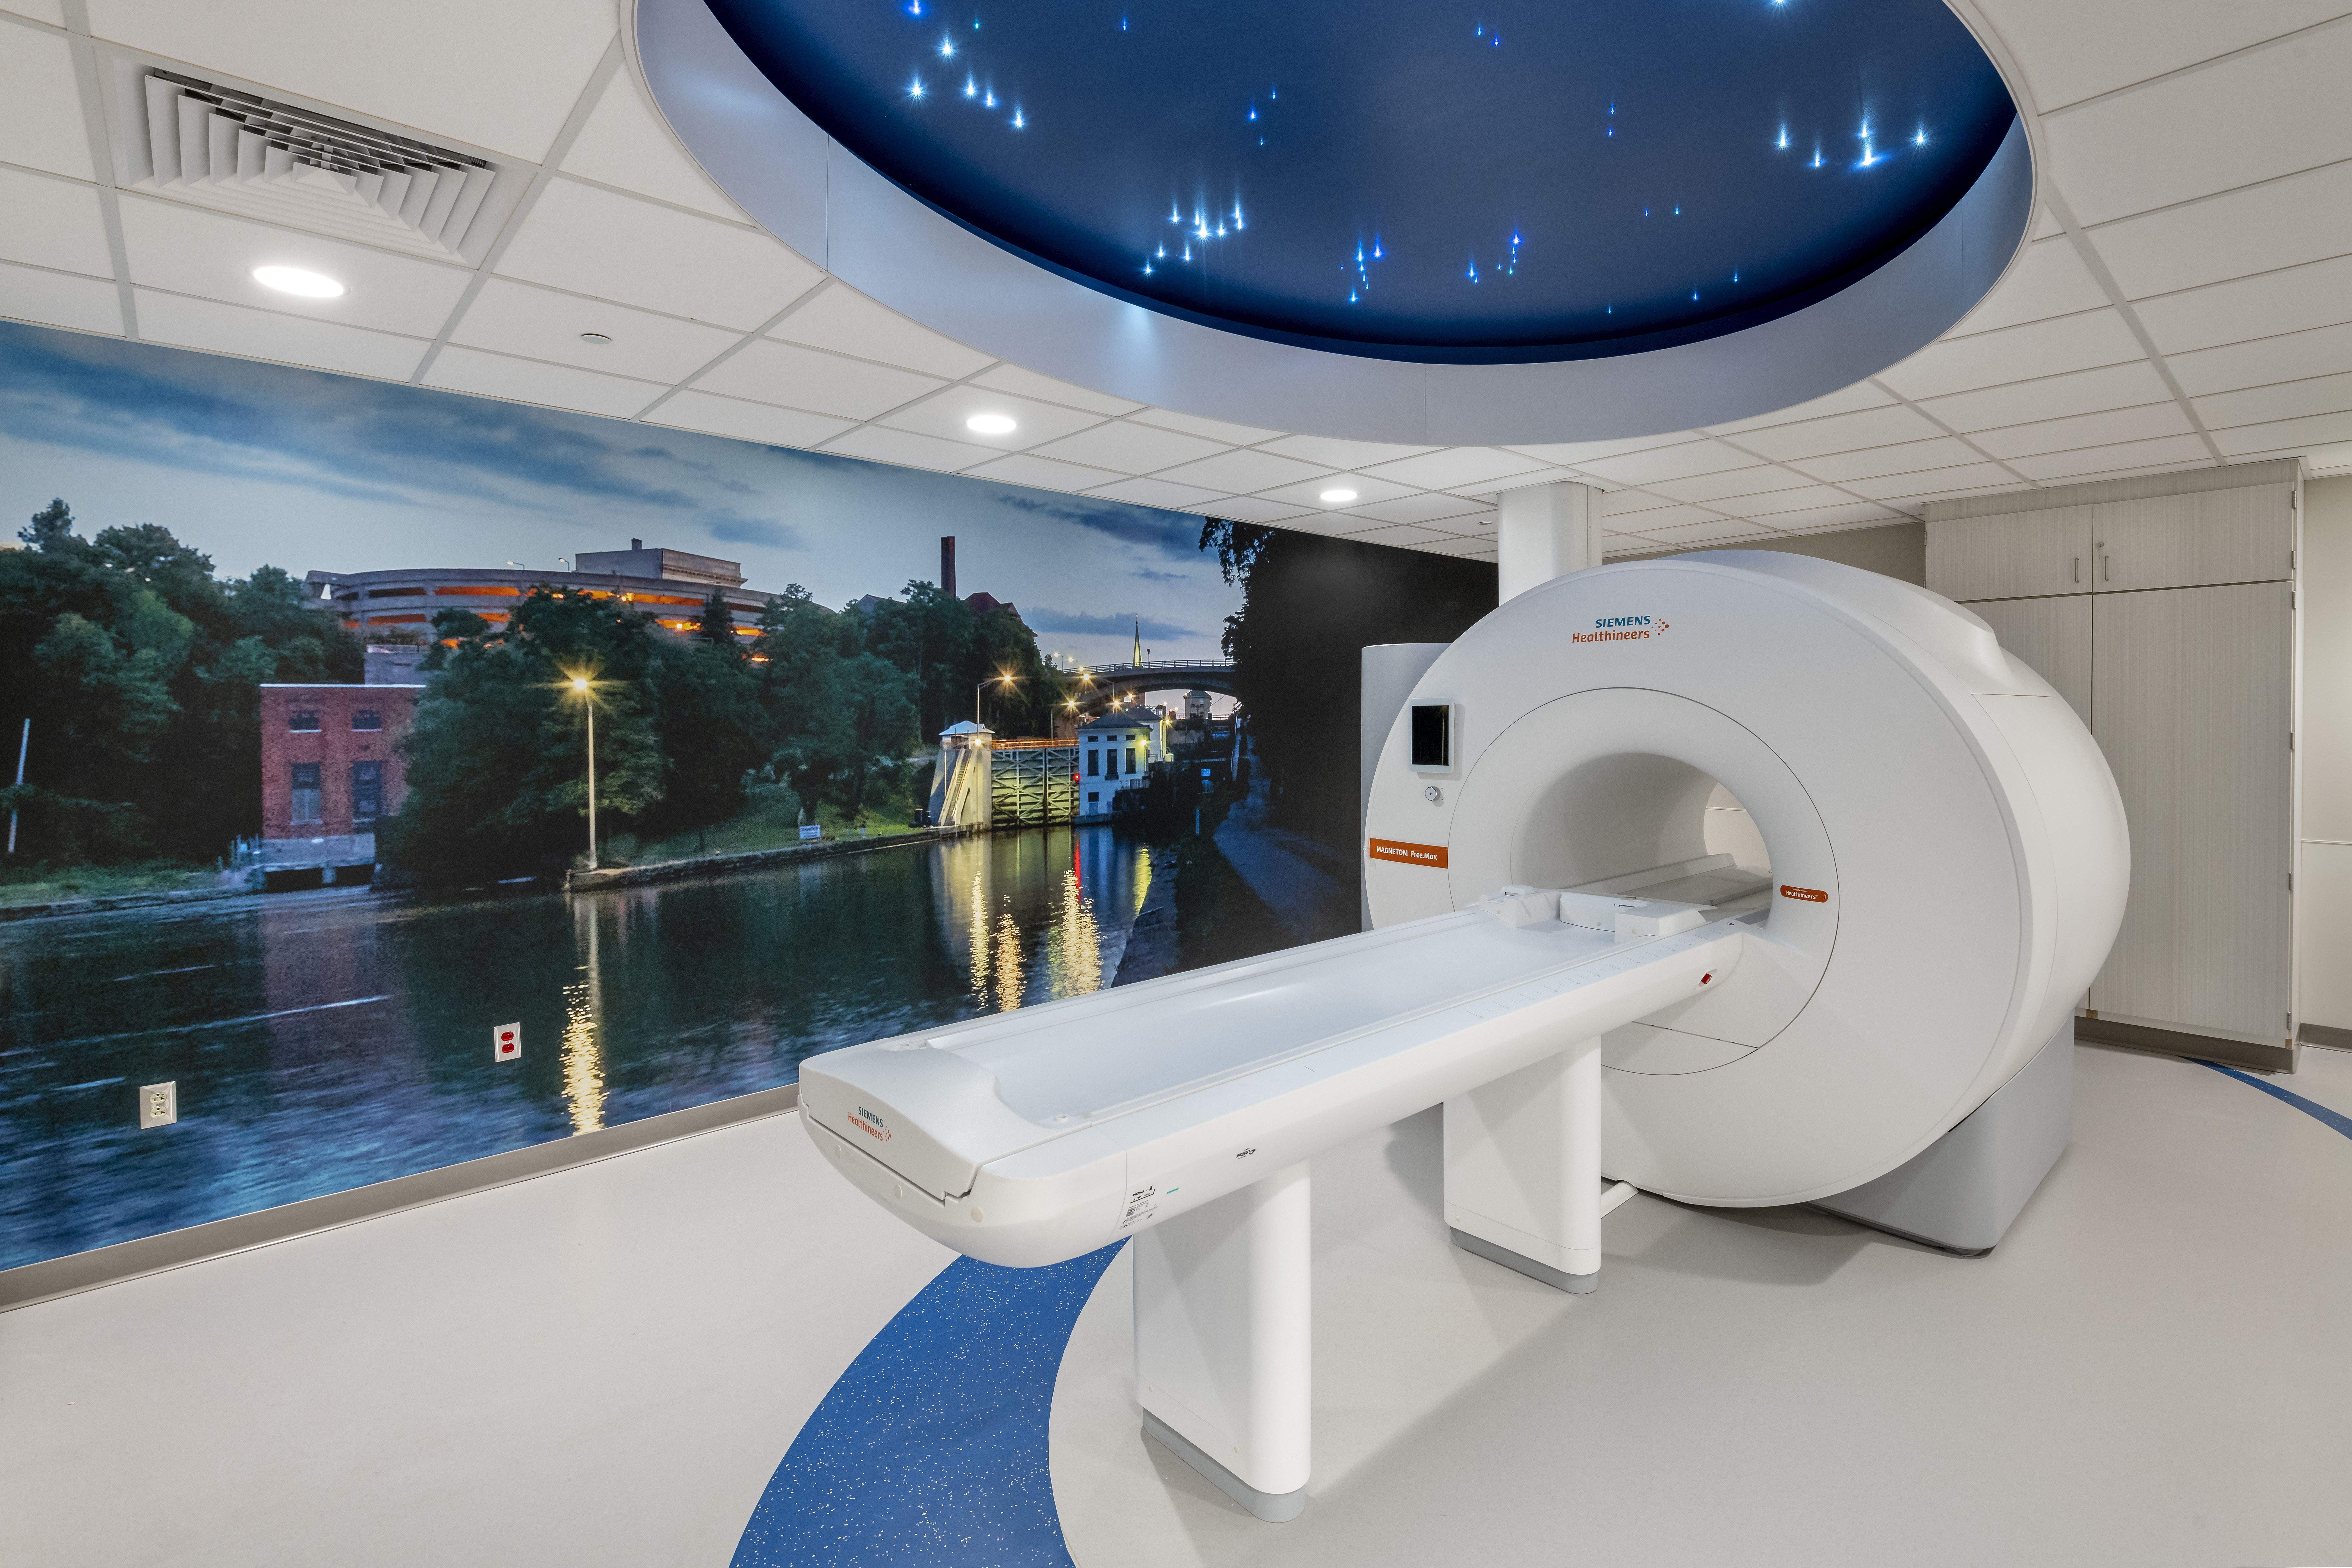 CT machine in a room with scenic wall coverings and blue ceiling